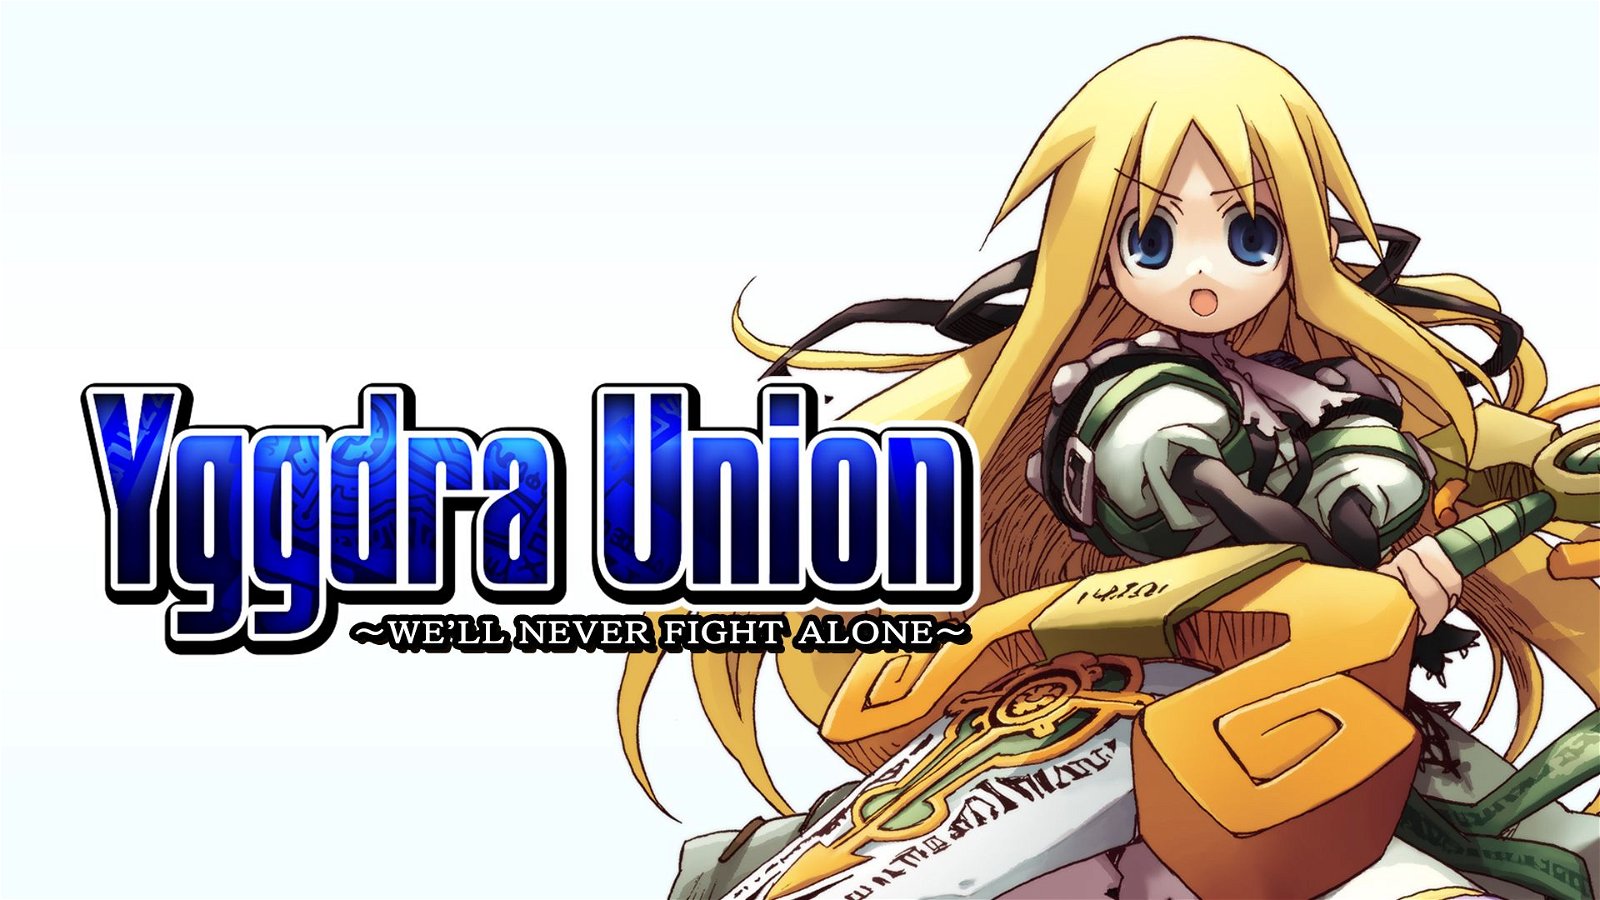 Image of YGGDRA UNION ~WE'LL NEVER FIGHT ALONE~